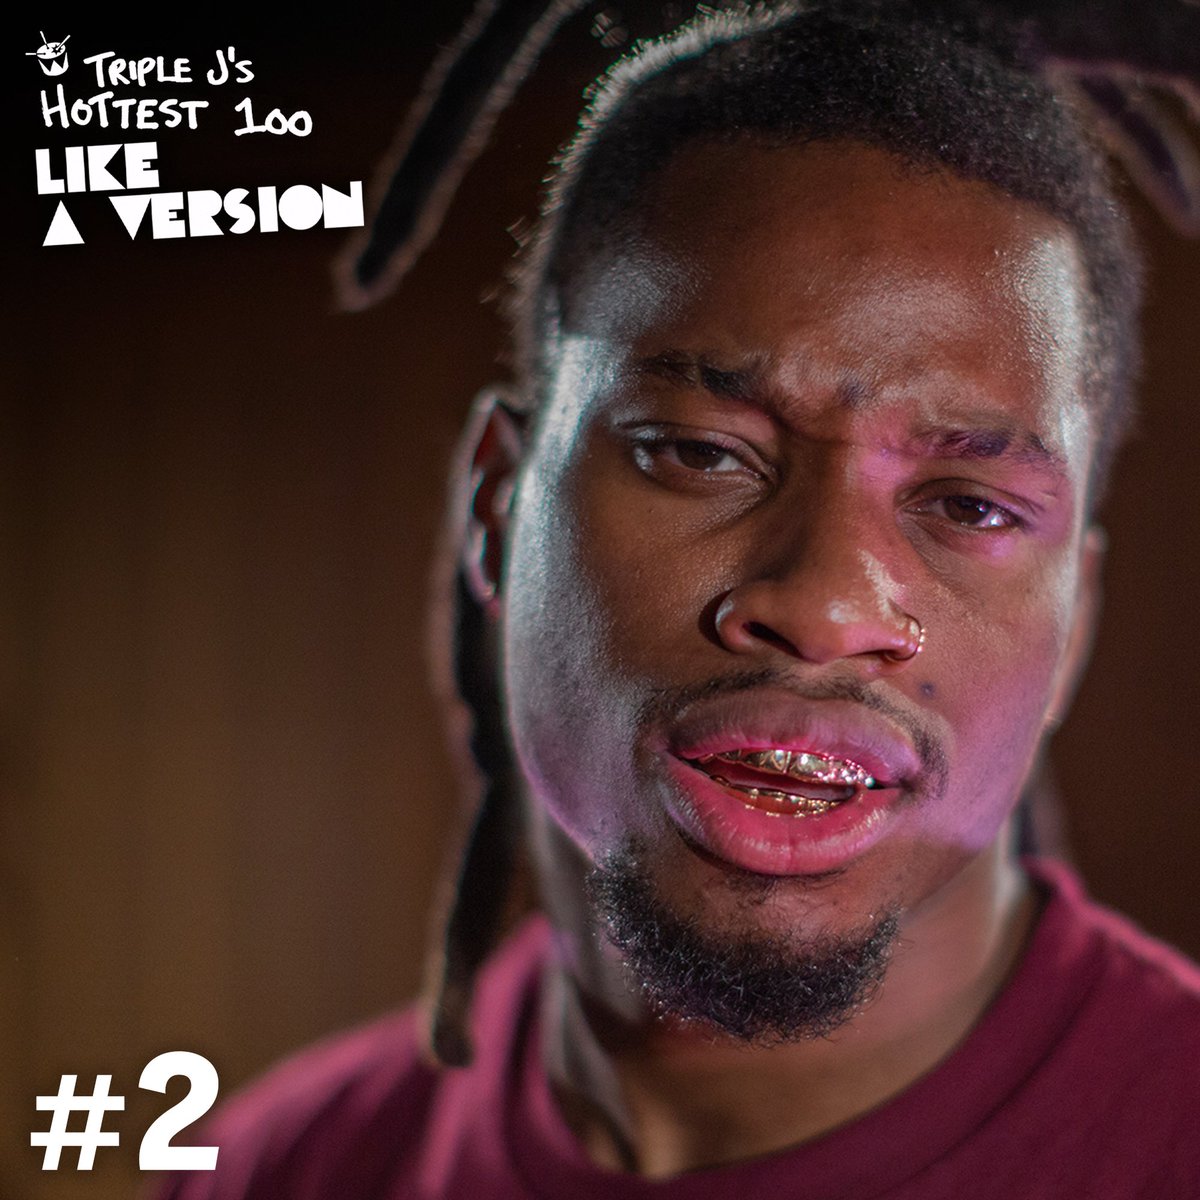 triple j's #Hottest100 of #LikeAVersion #2 @denzelcurry - 'Bulls On Parade'